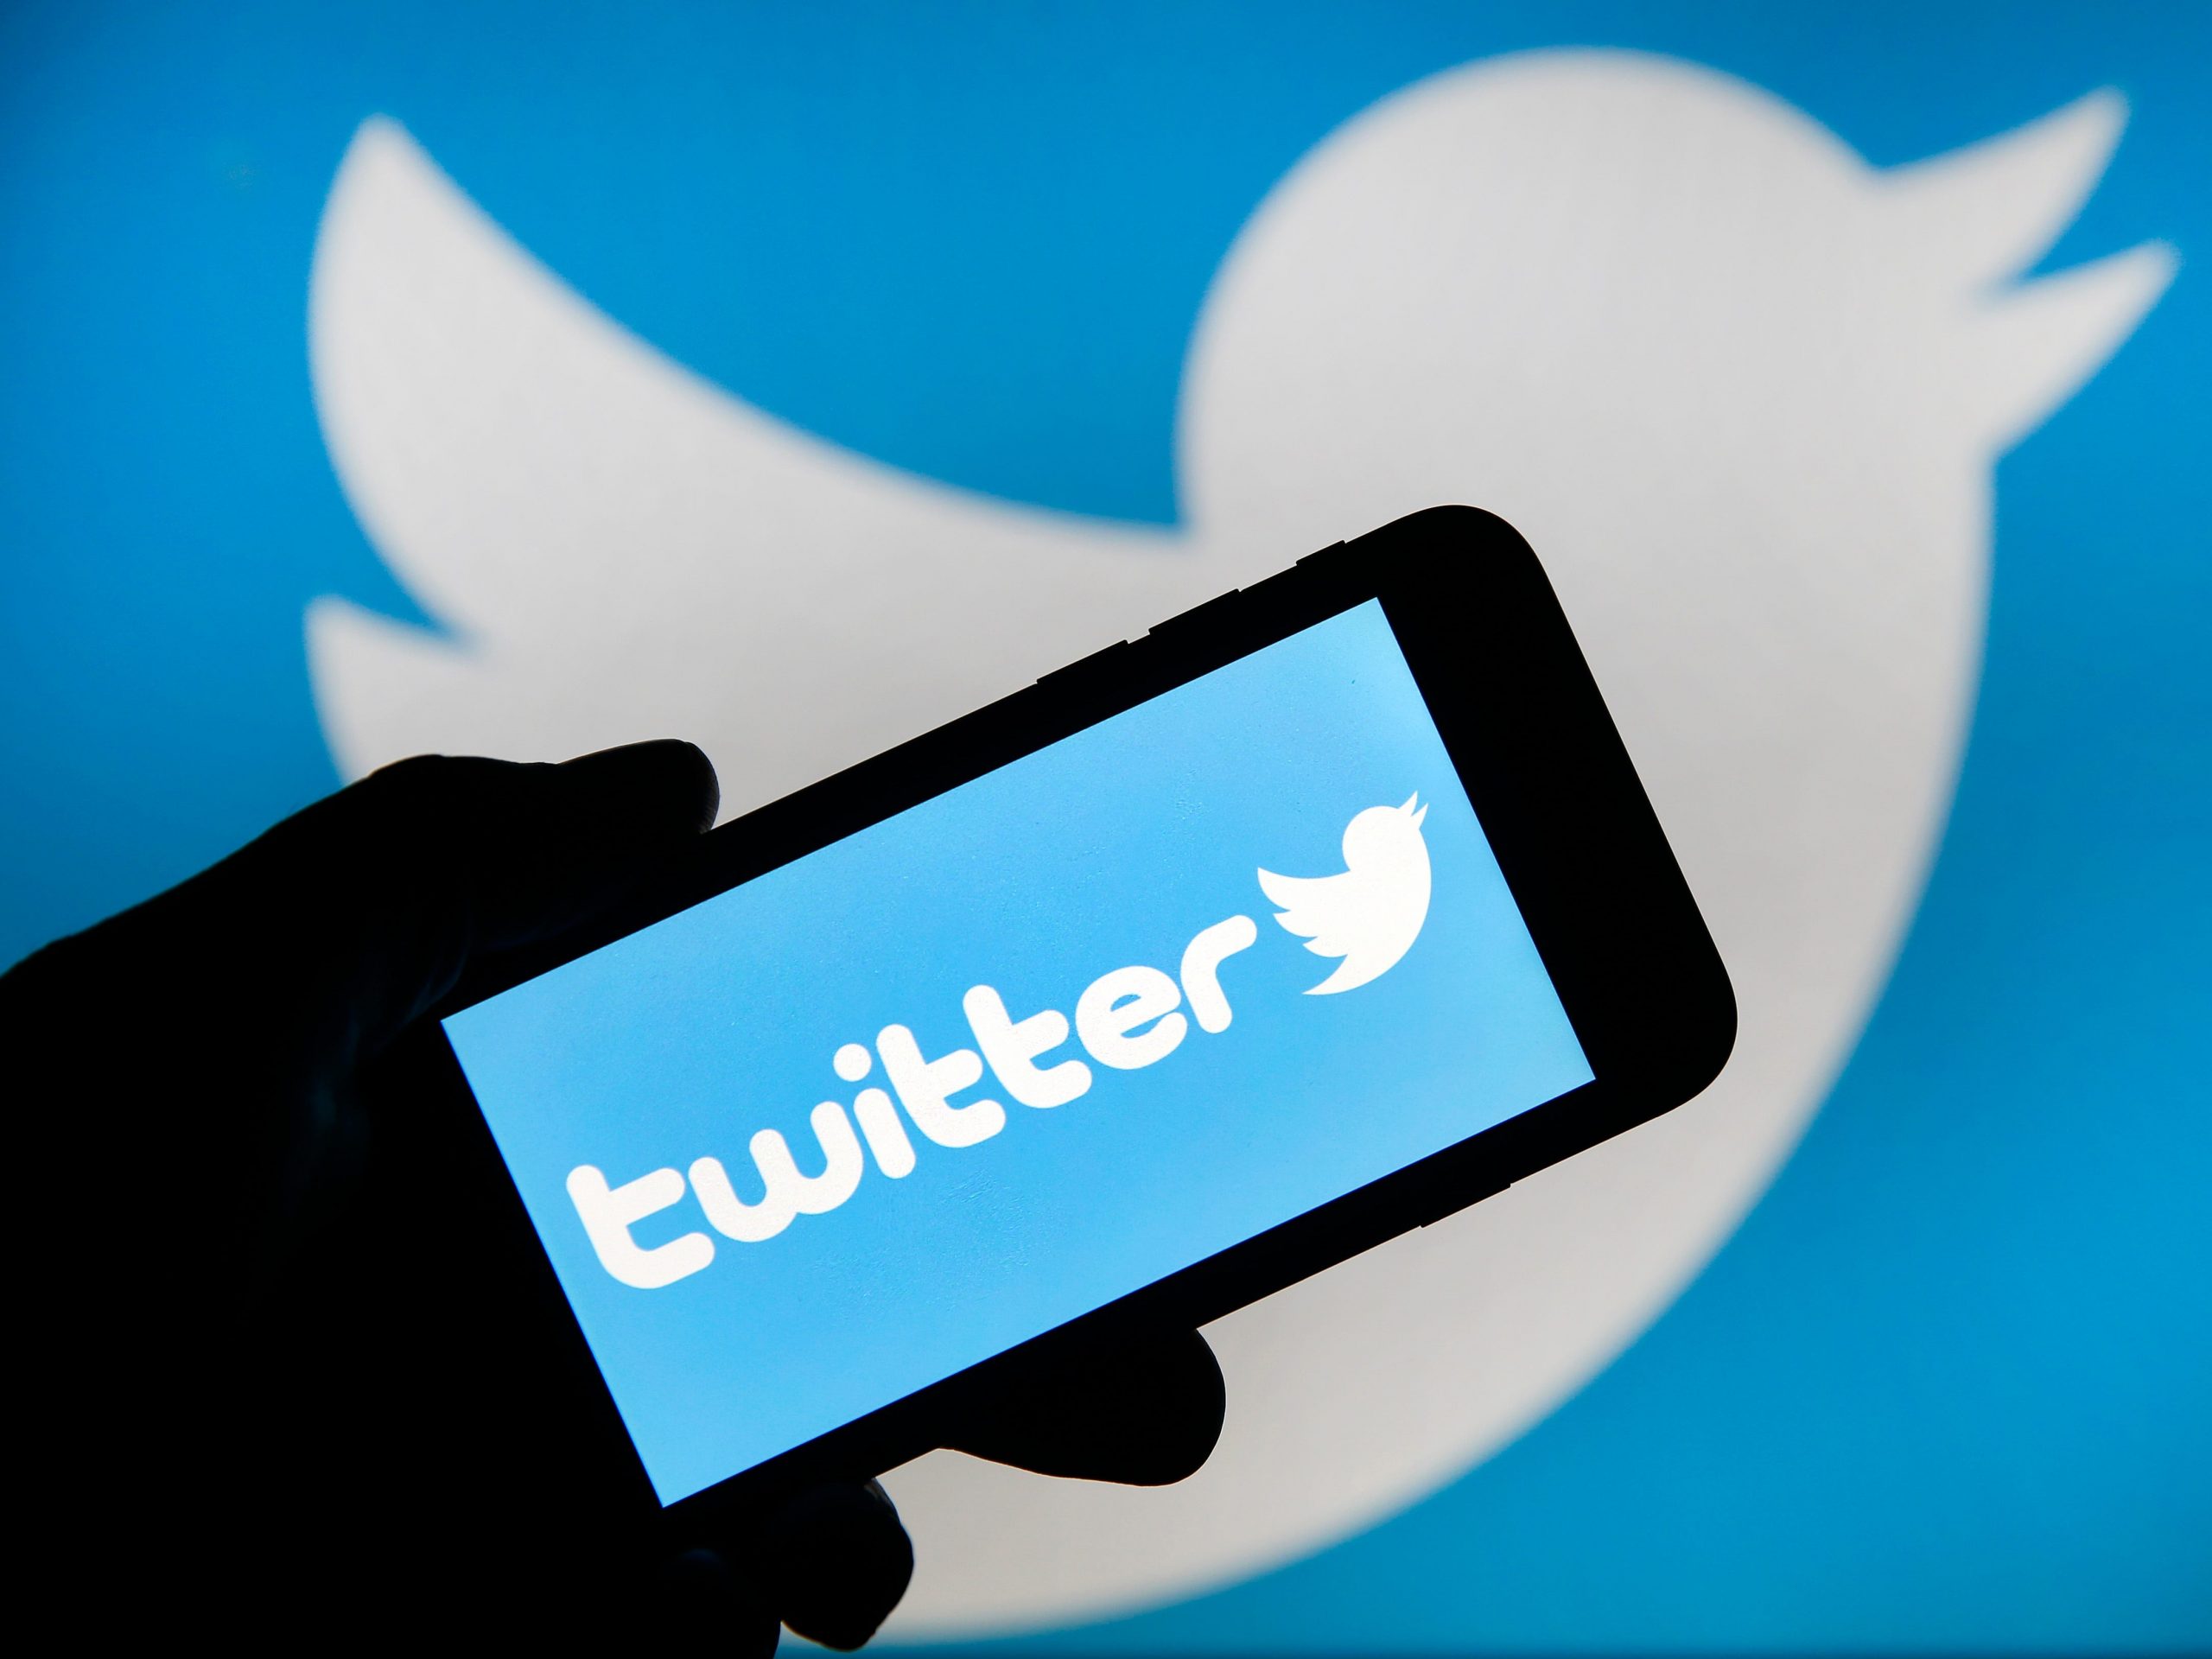 A smartphone with the Twitter logo being held in front of the Twitter bird icon.